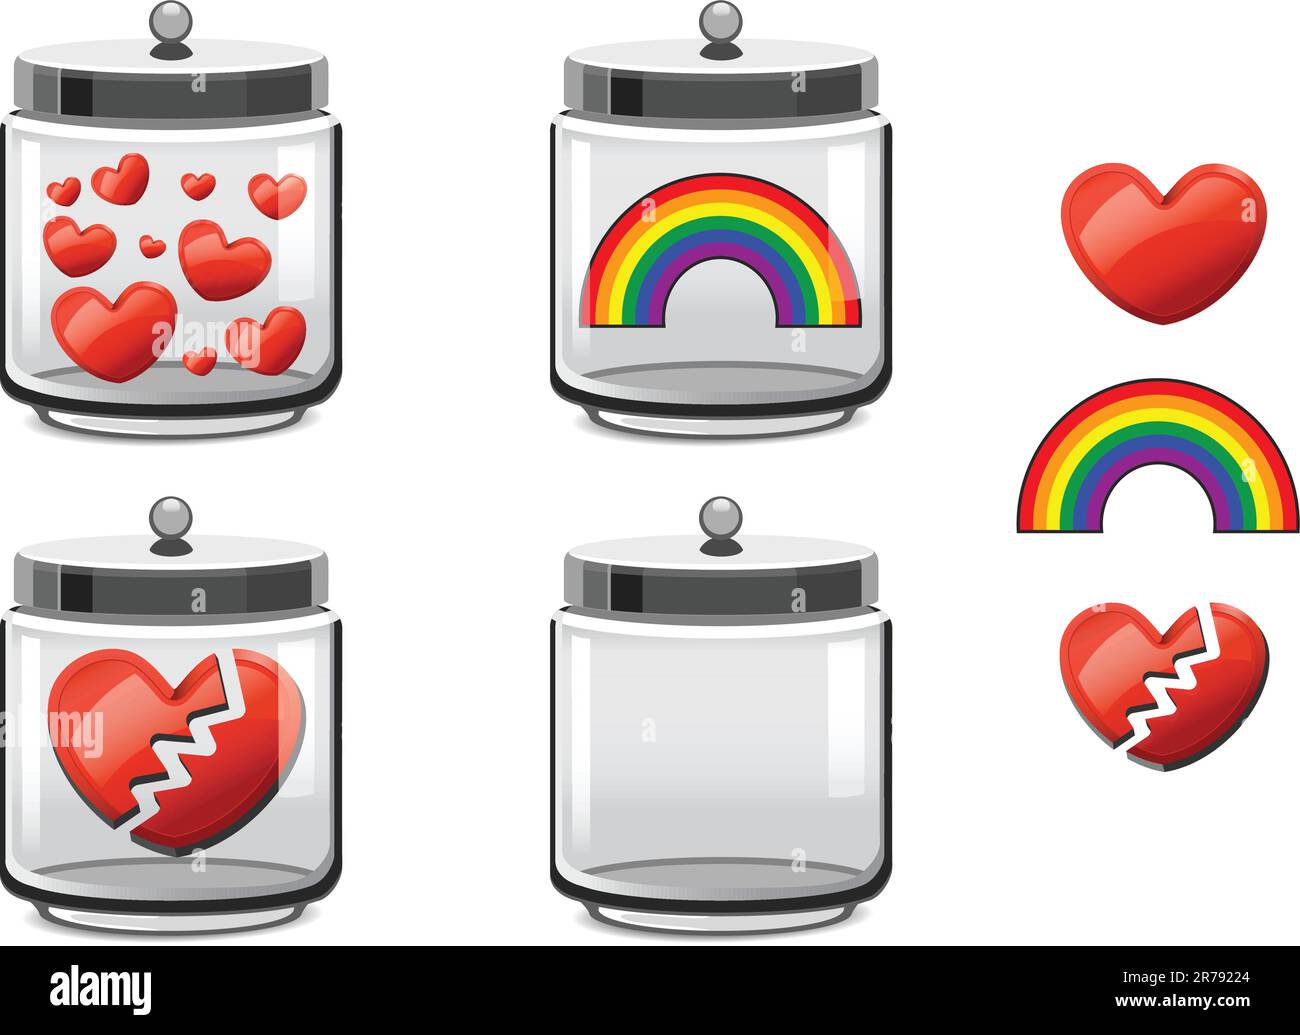 A jar of hearts, trapped rainbow, broken heart container and empty glass jar Stock Vector